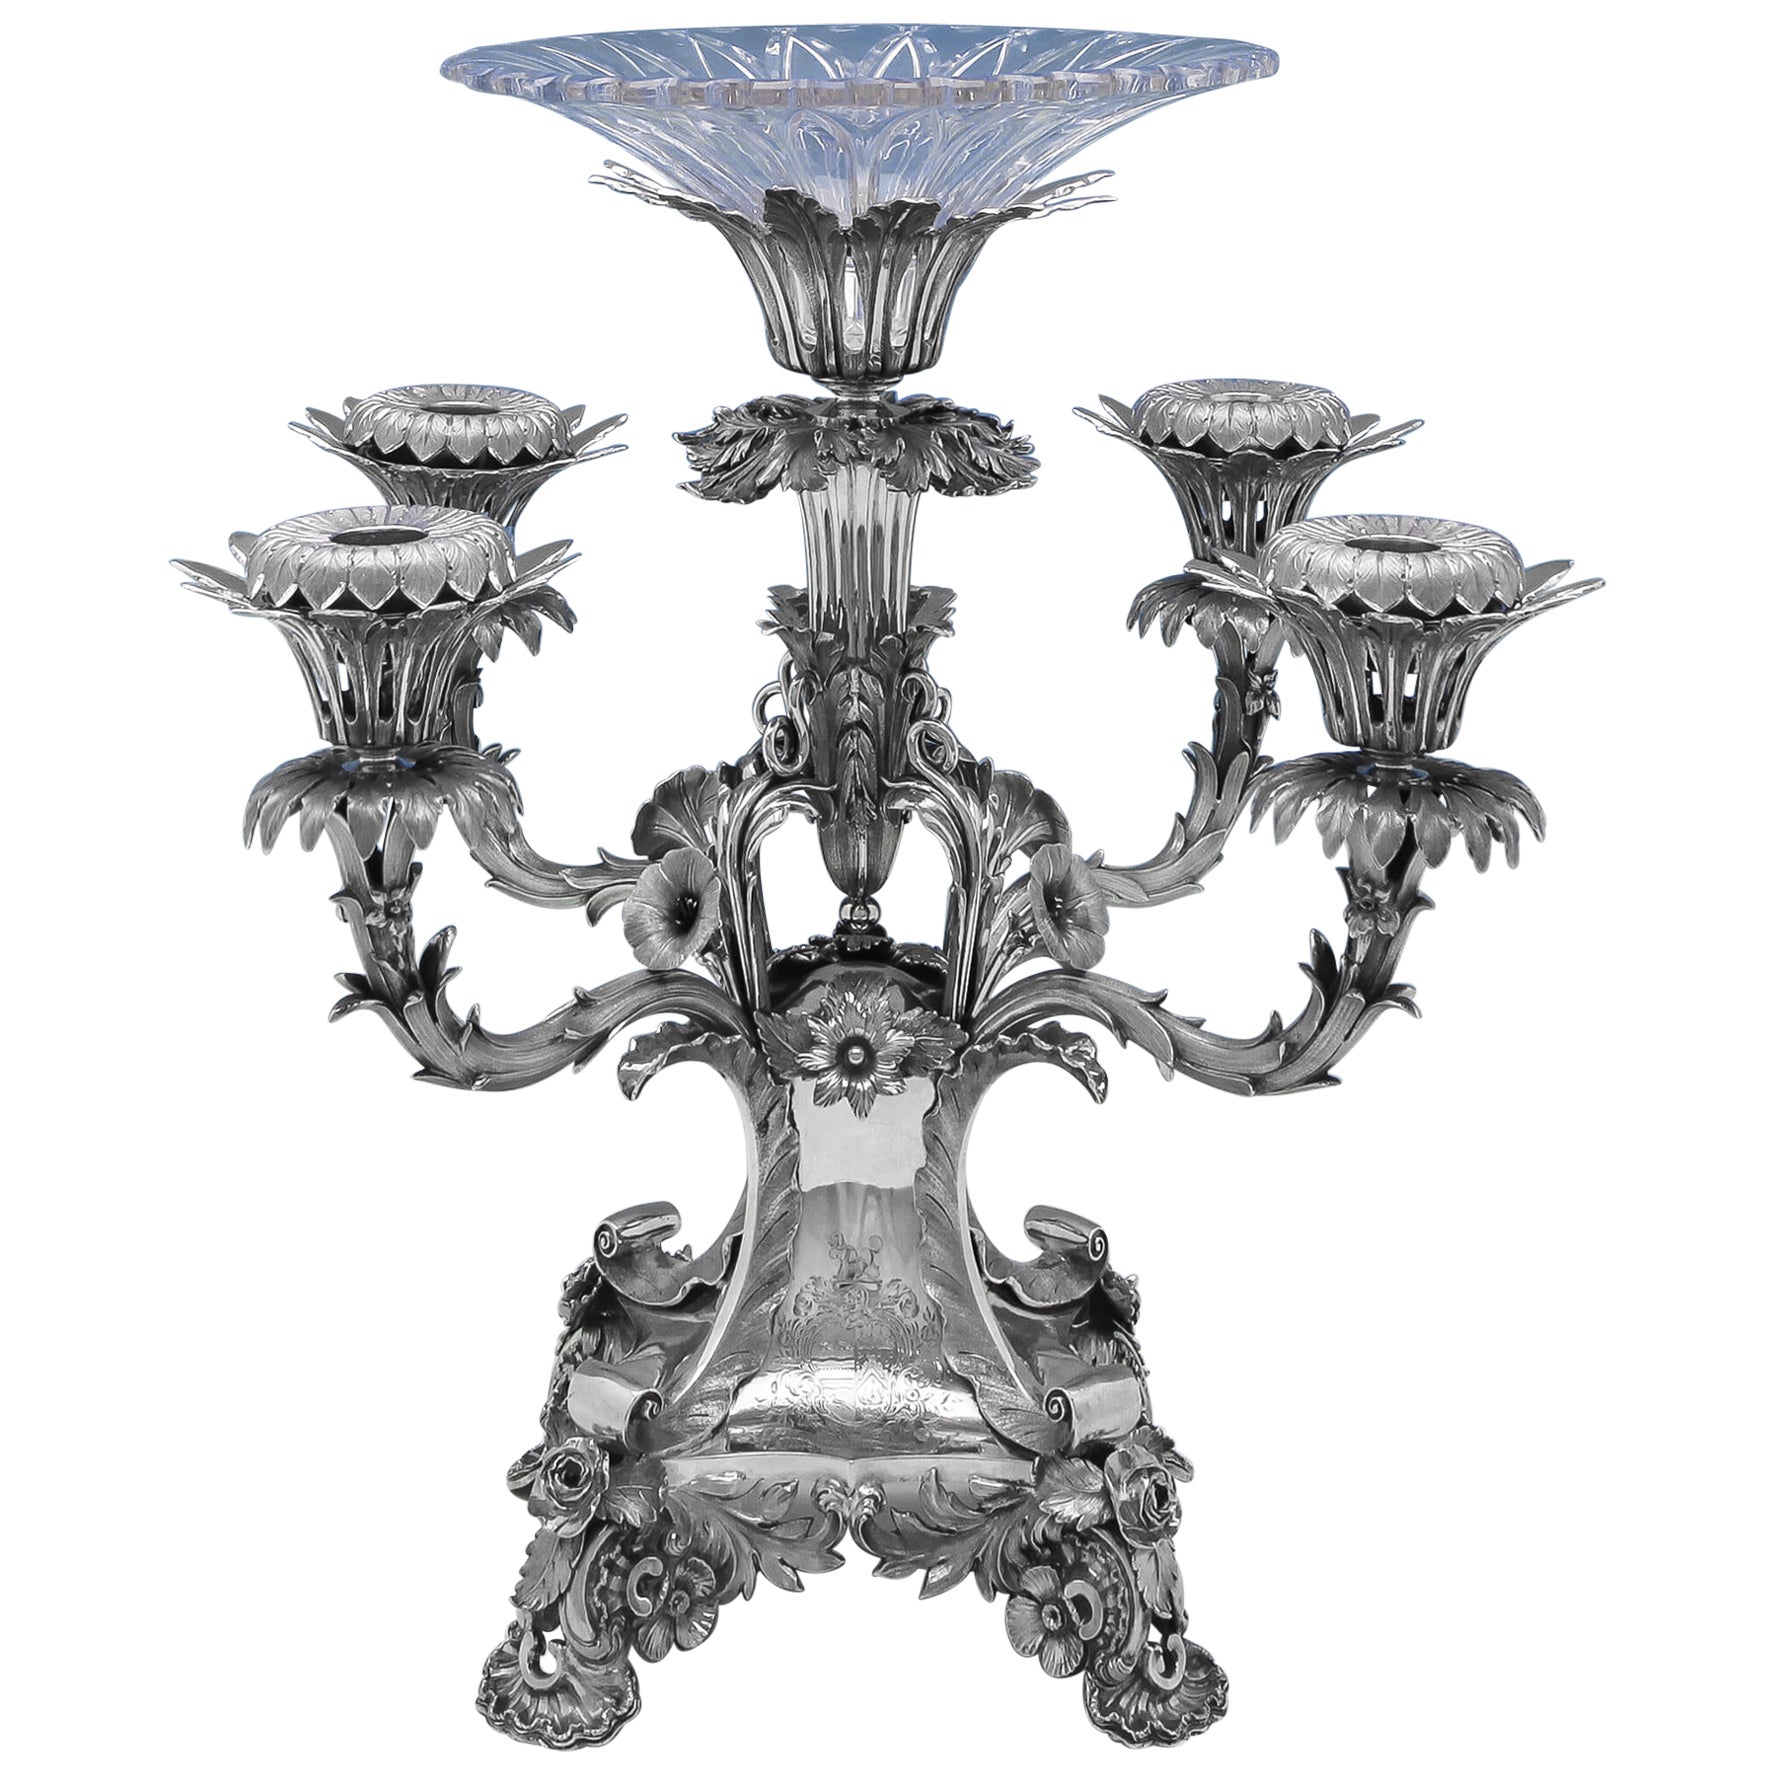 Incredible 19th century English Silver Centrepiece or Epergne - William IV 1834 For Sale